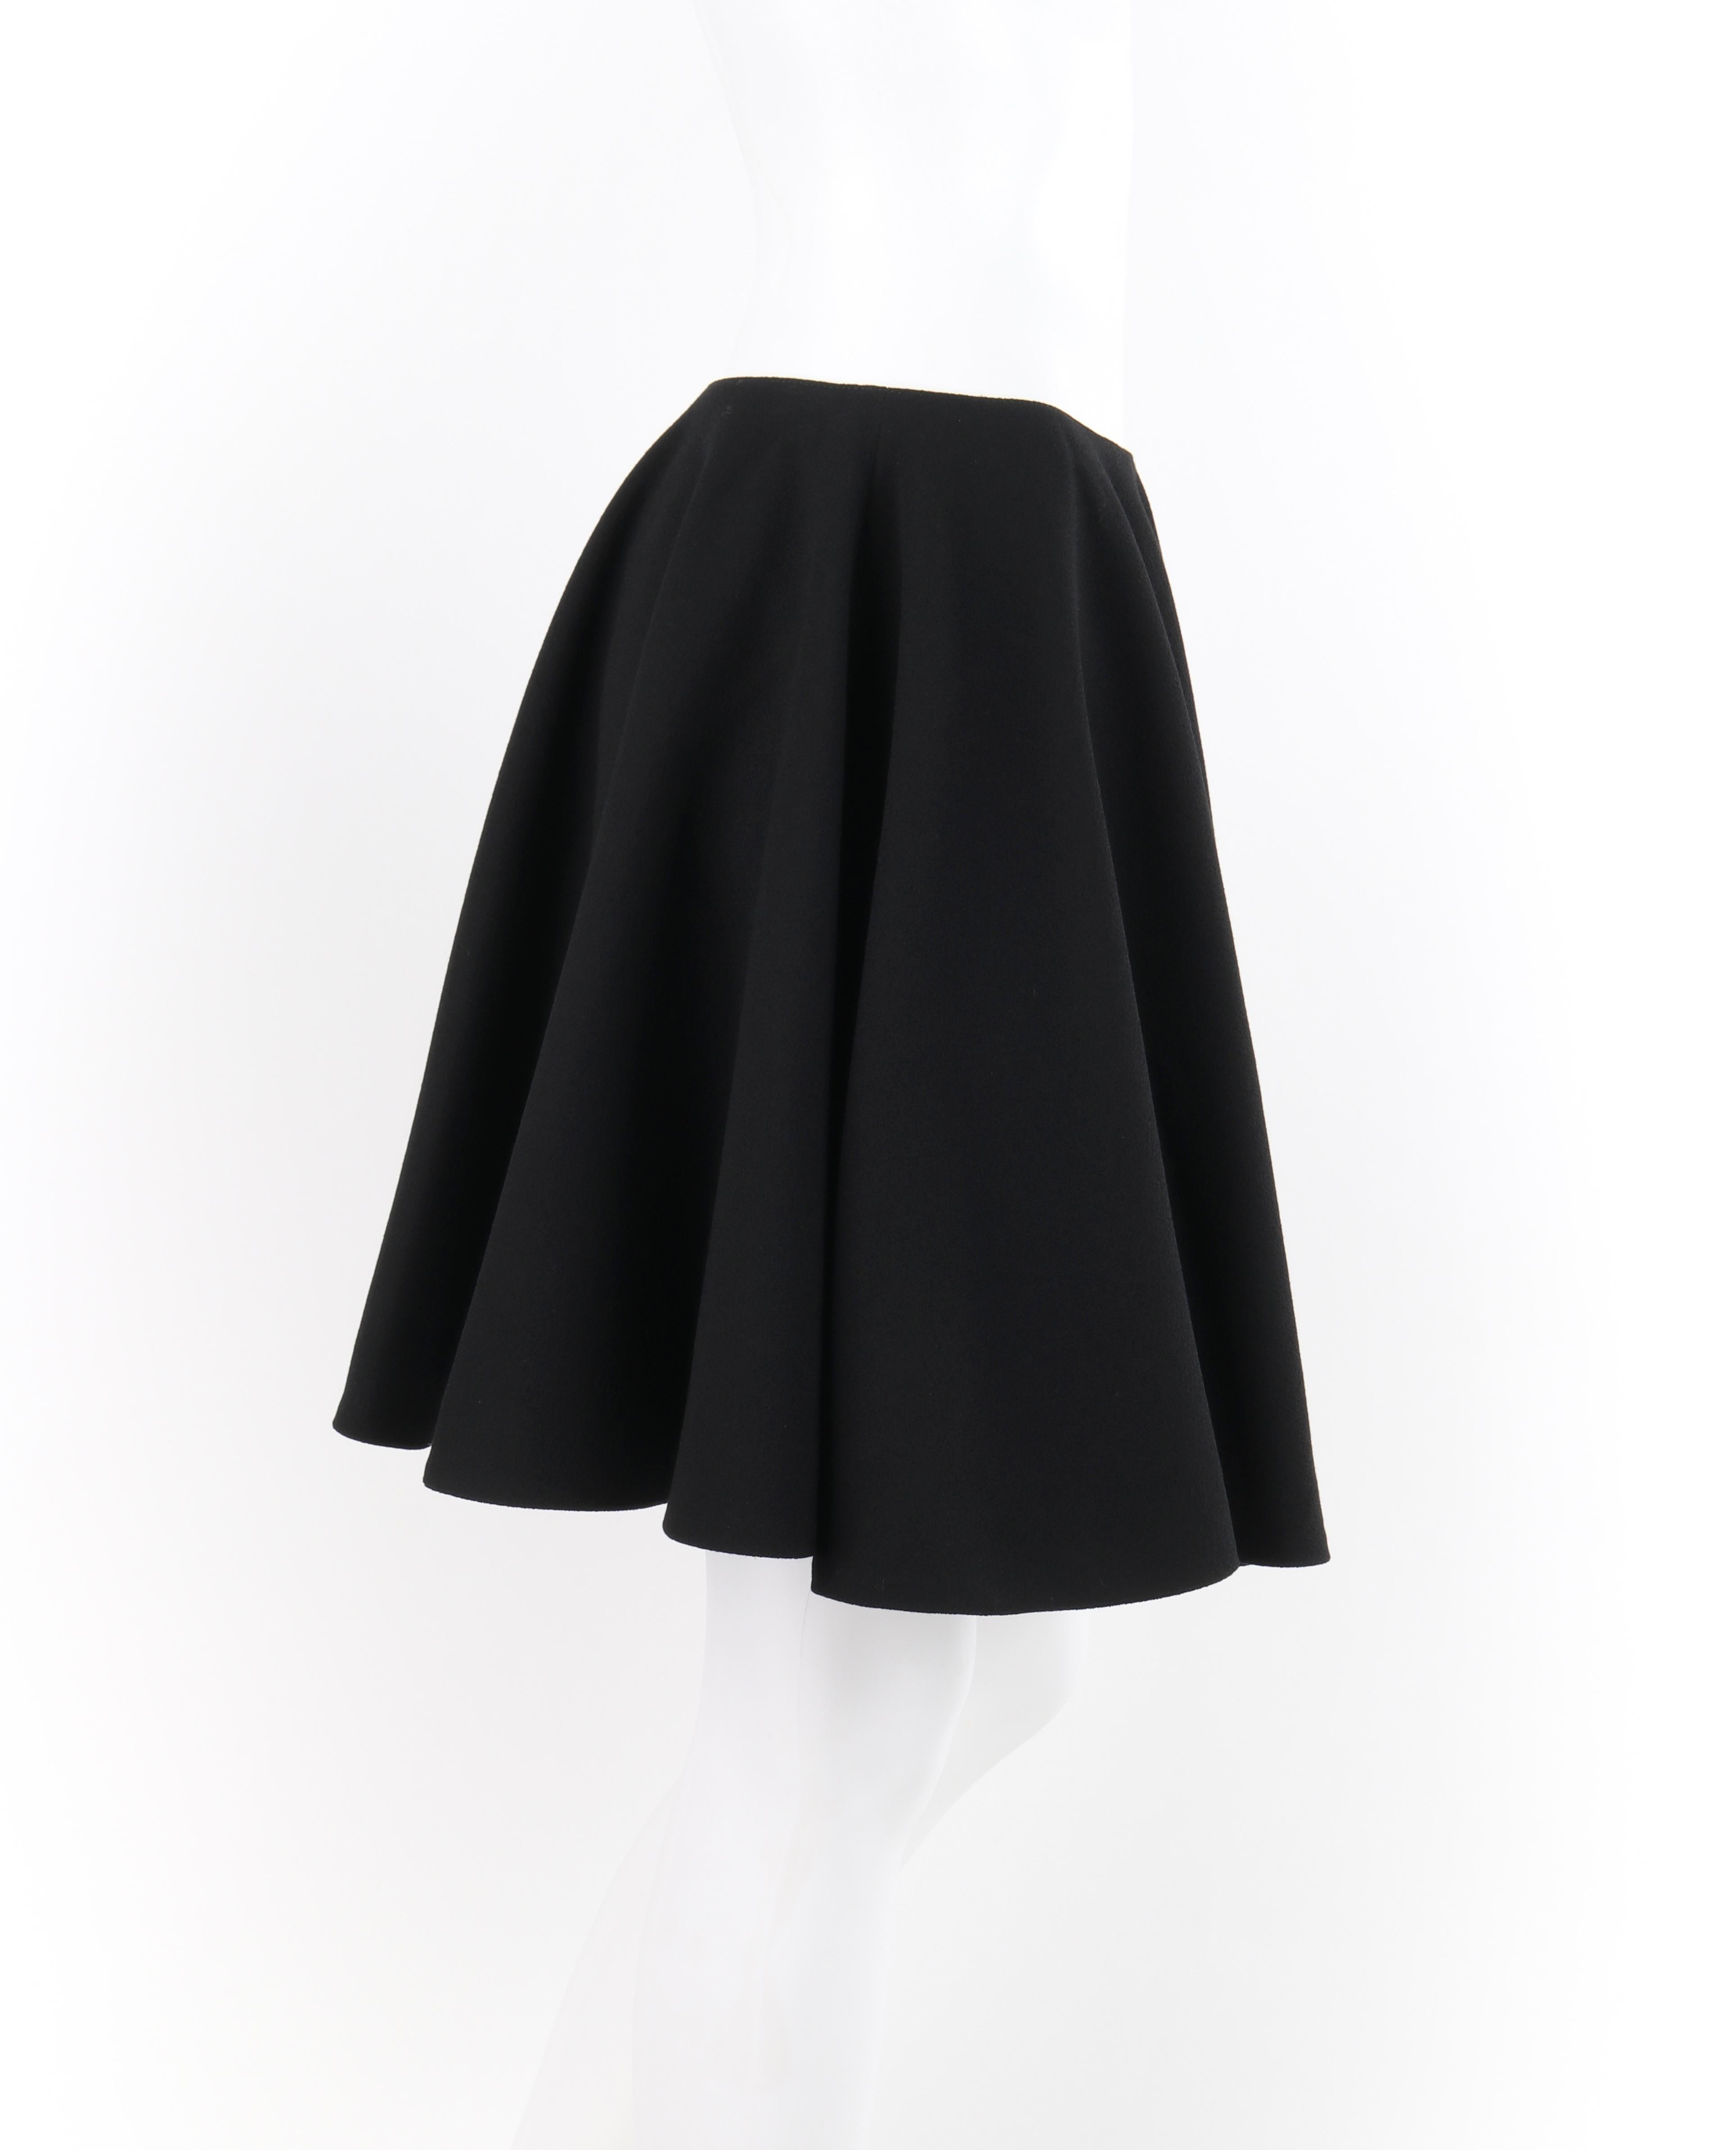 ALEXANDER McQUEEN A/W 2012 Black Wool Silk Above-The-Knee Full Circle Skirt In Excellent Condition For Sale In Thiensville, WI